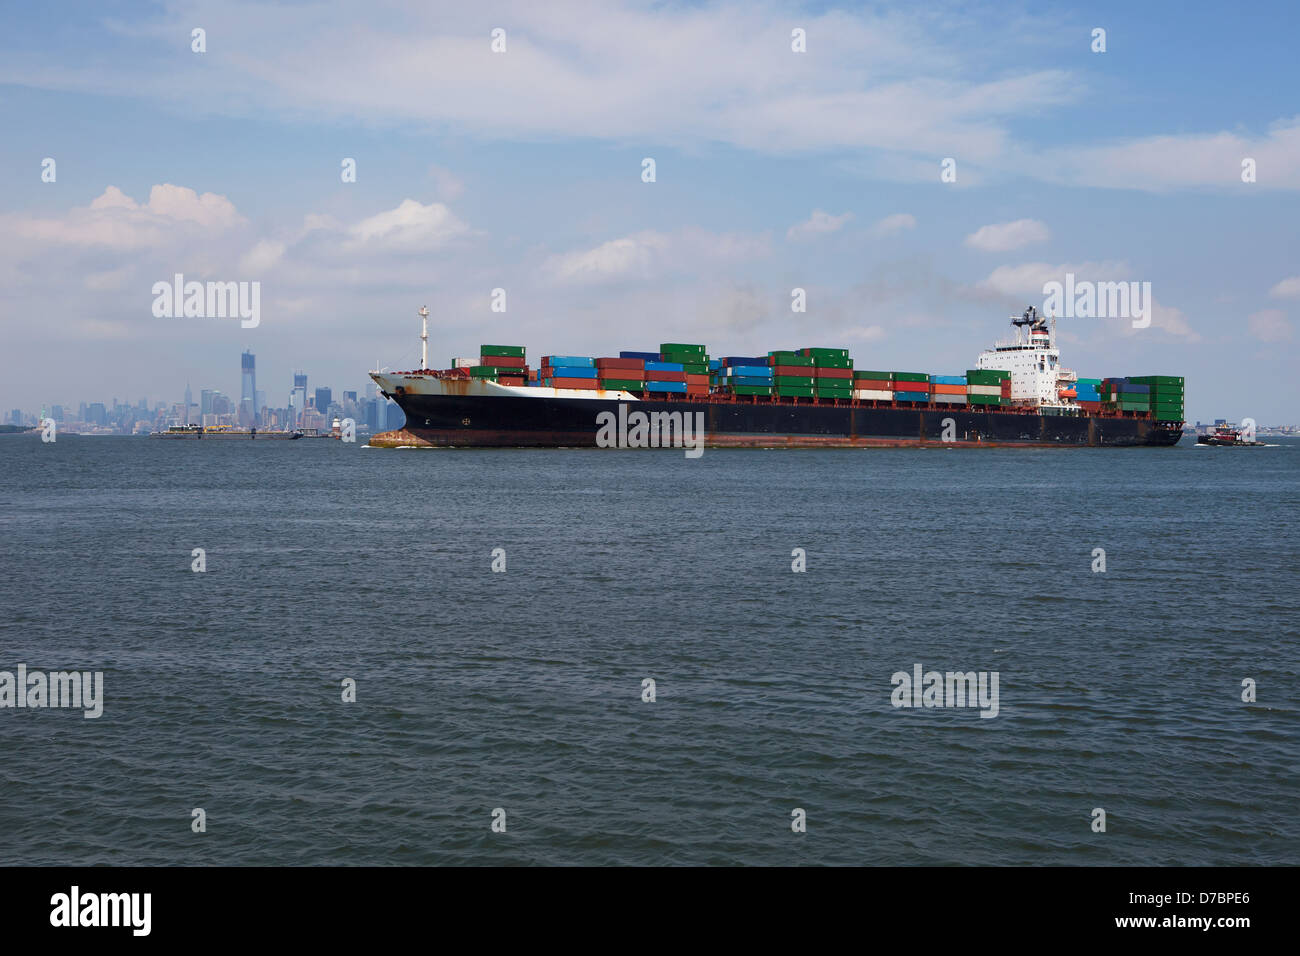 Container Ship Arriving On Upper Bay Between Staten Island And Manhattan;New York City New York Usa Stock Photo